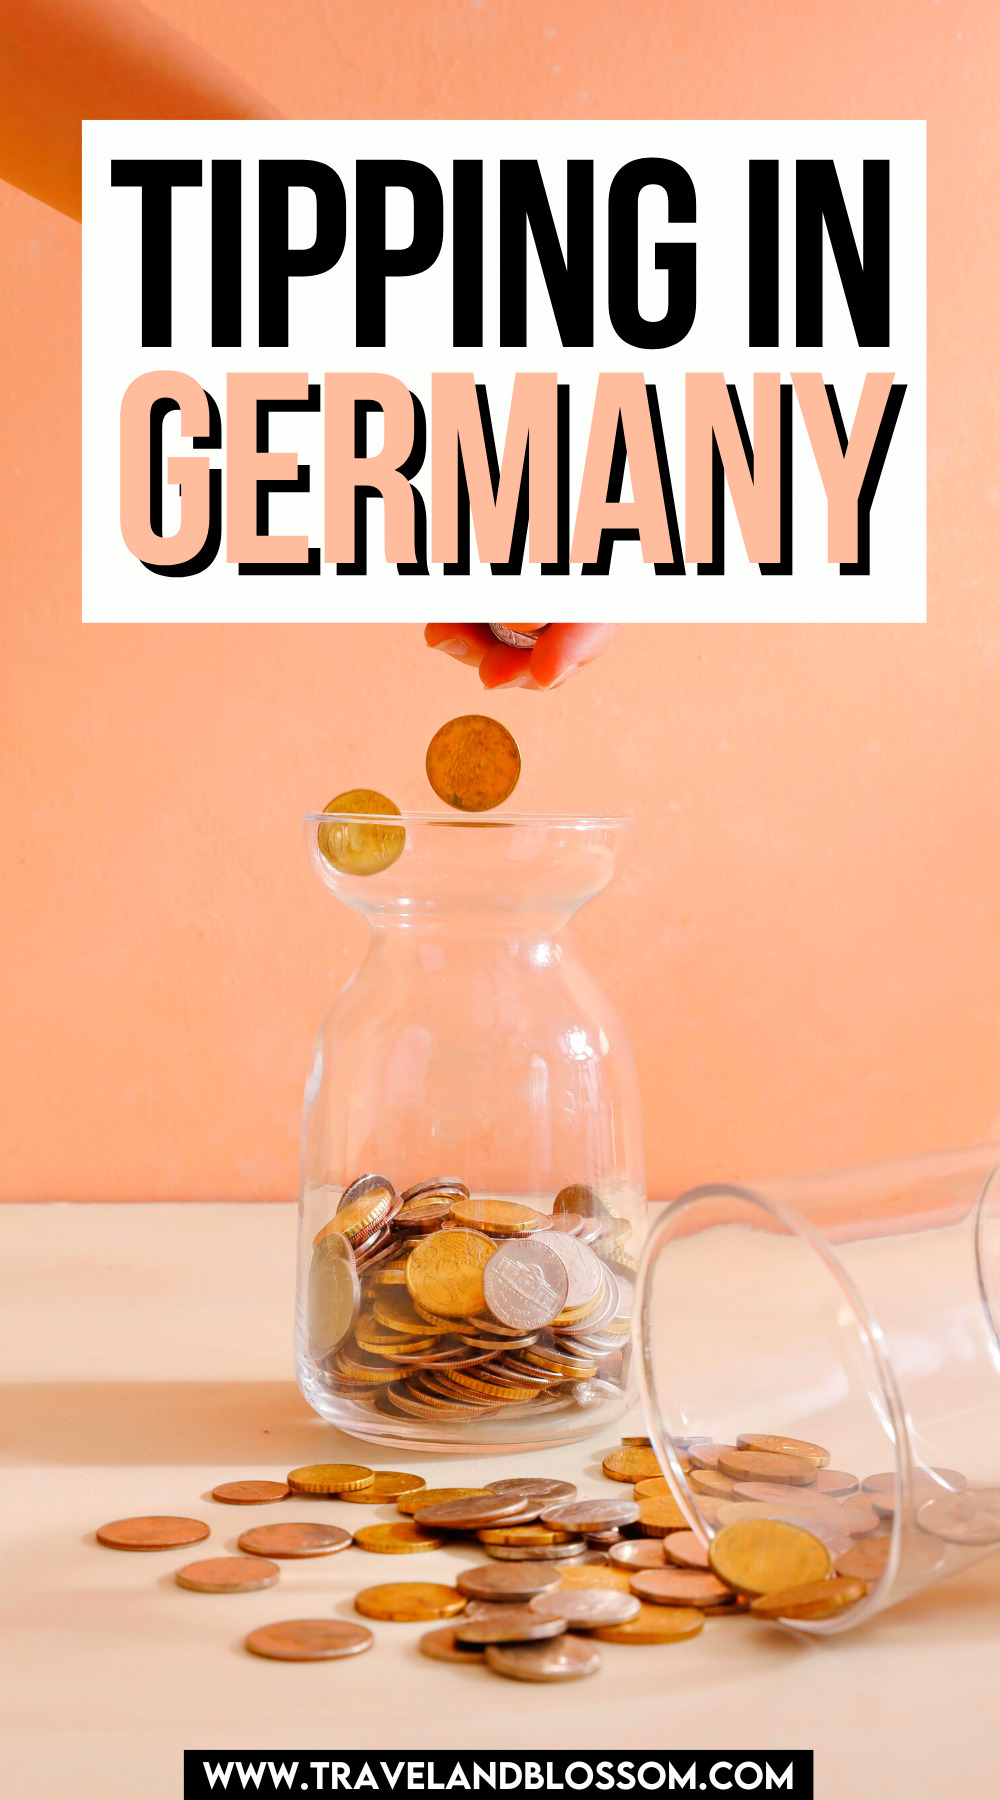 The American Guide to Tipping in Germany